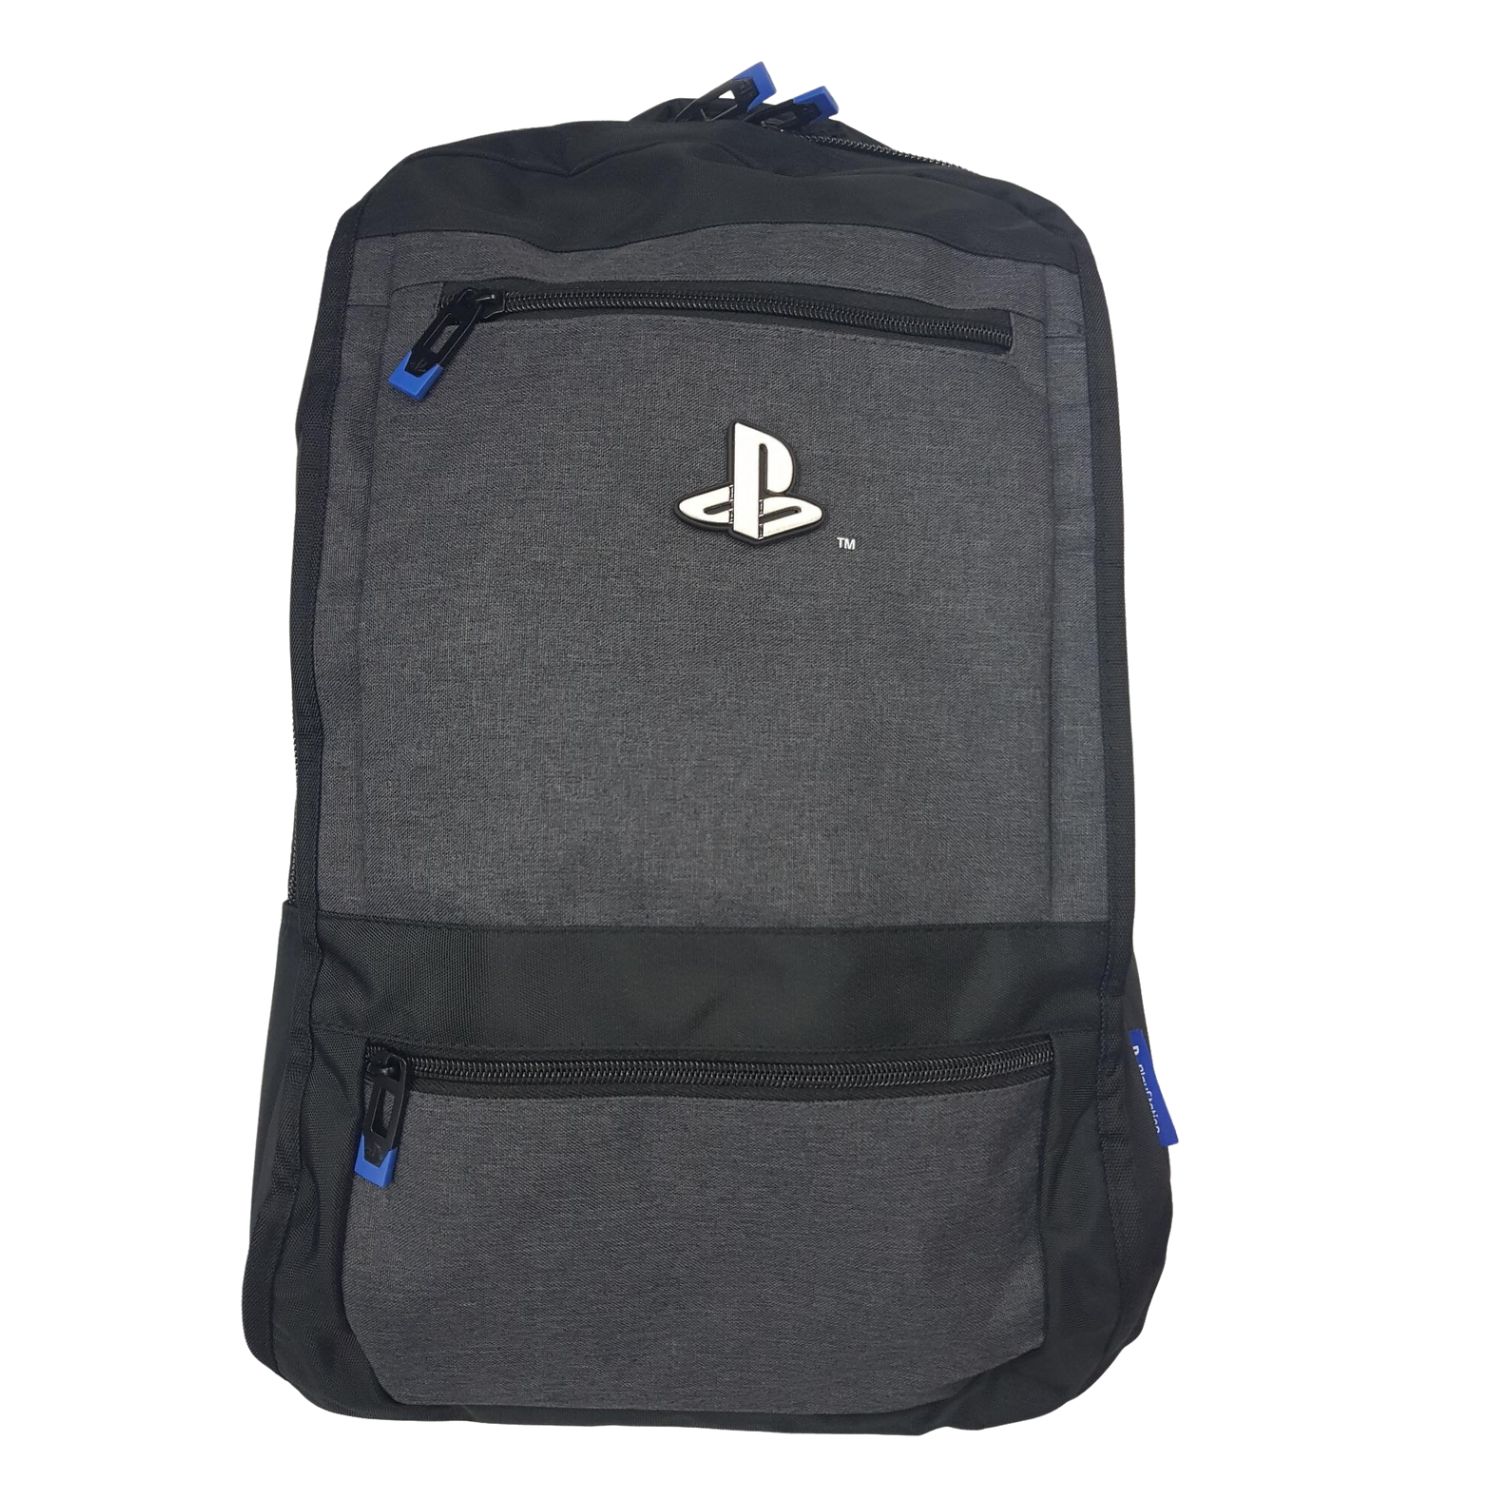 Playstation Laptop Backpack – E0159 - Farias Trading Limited